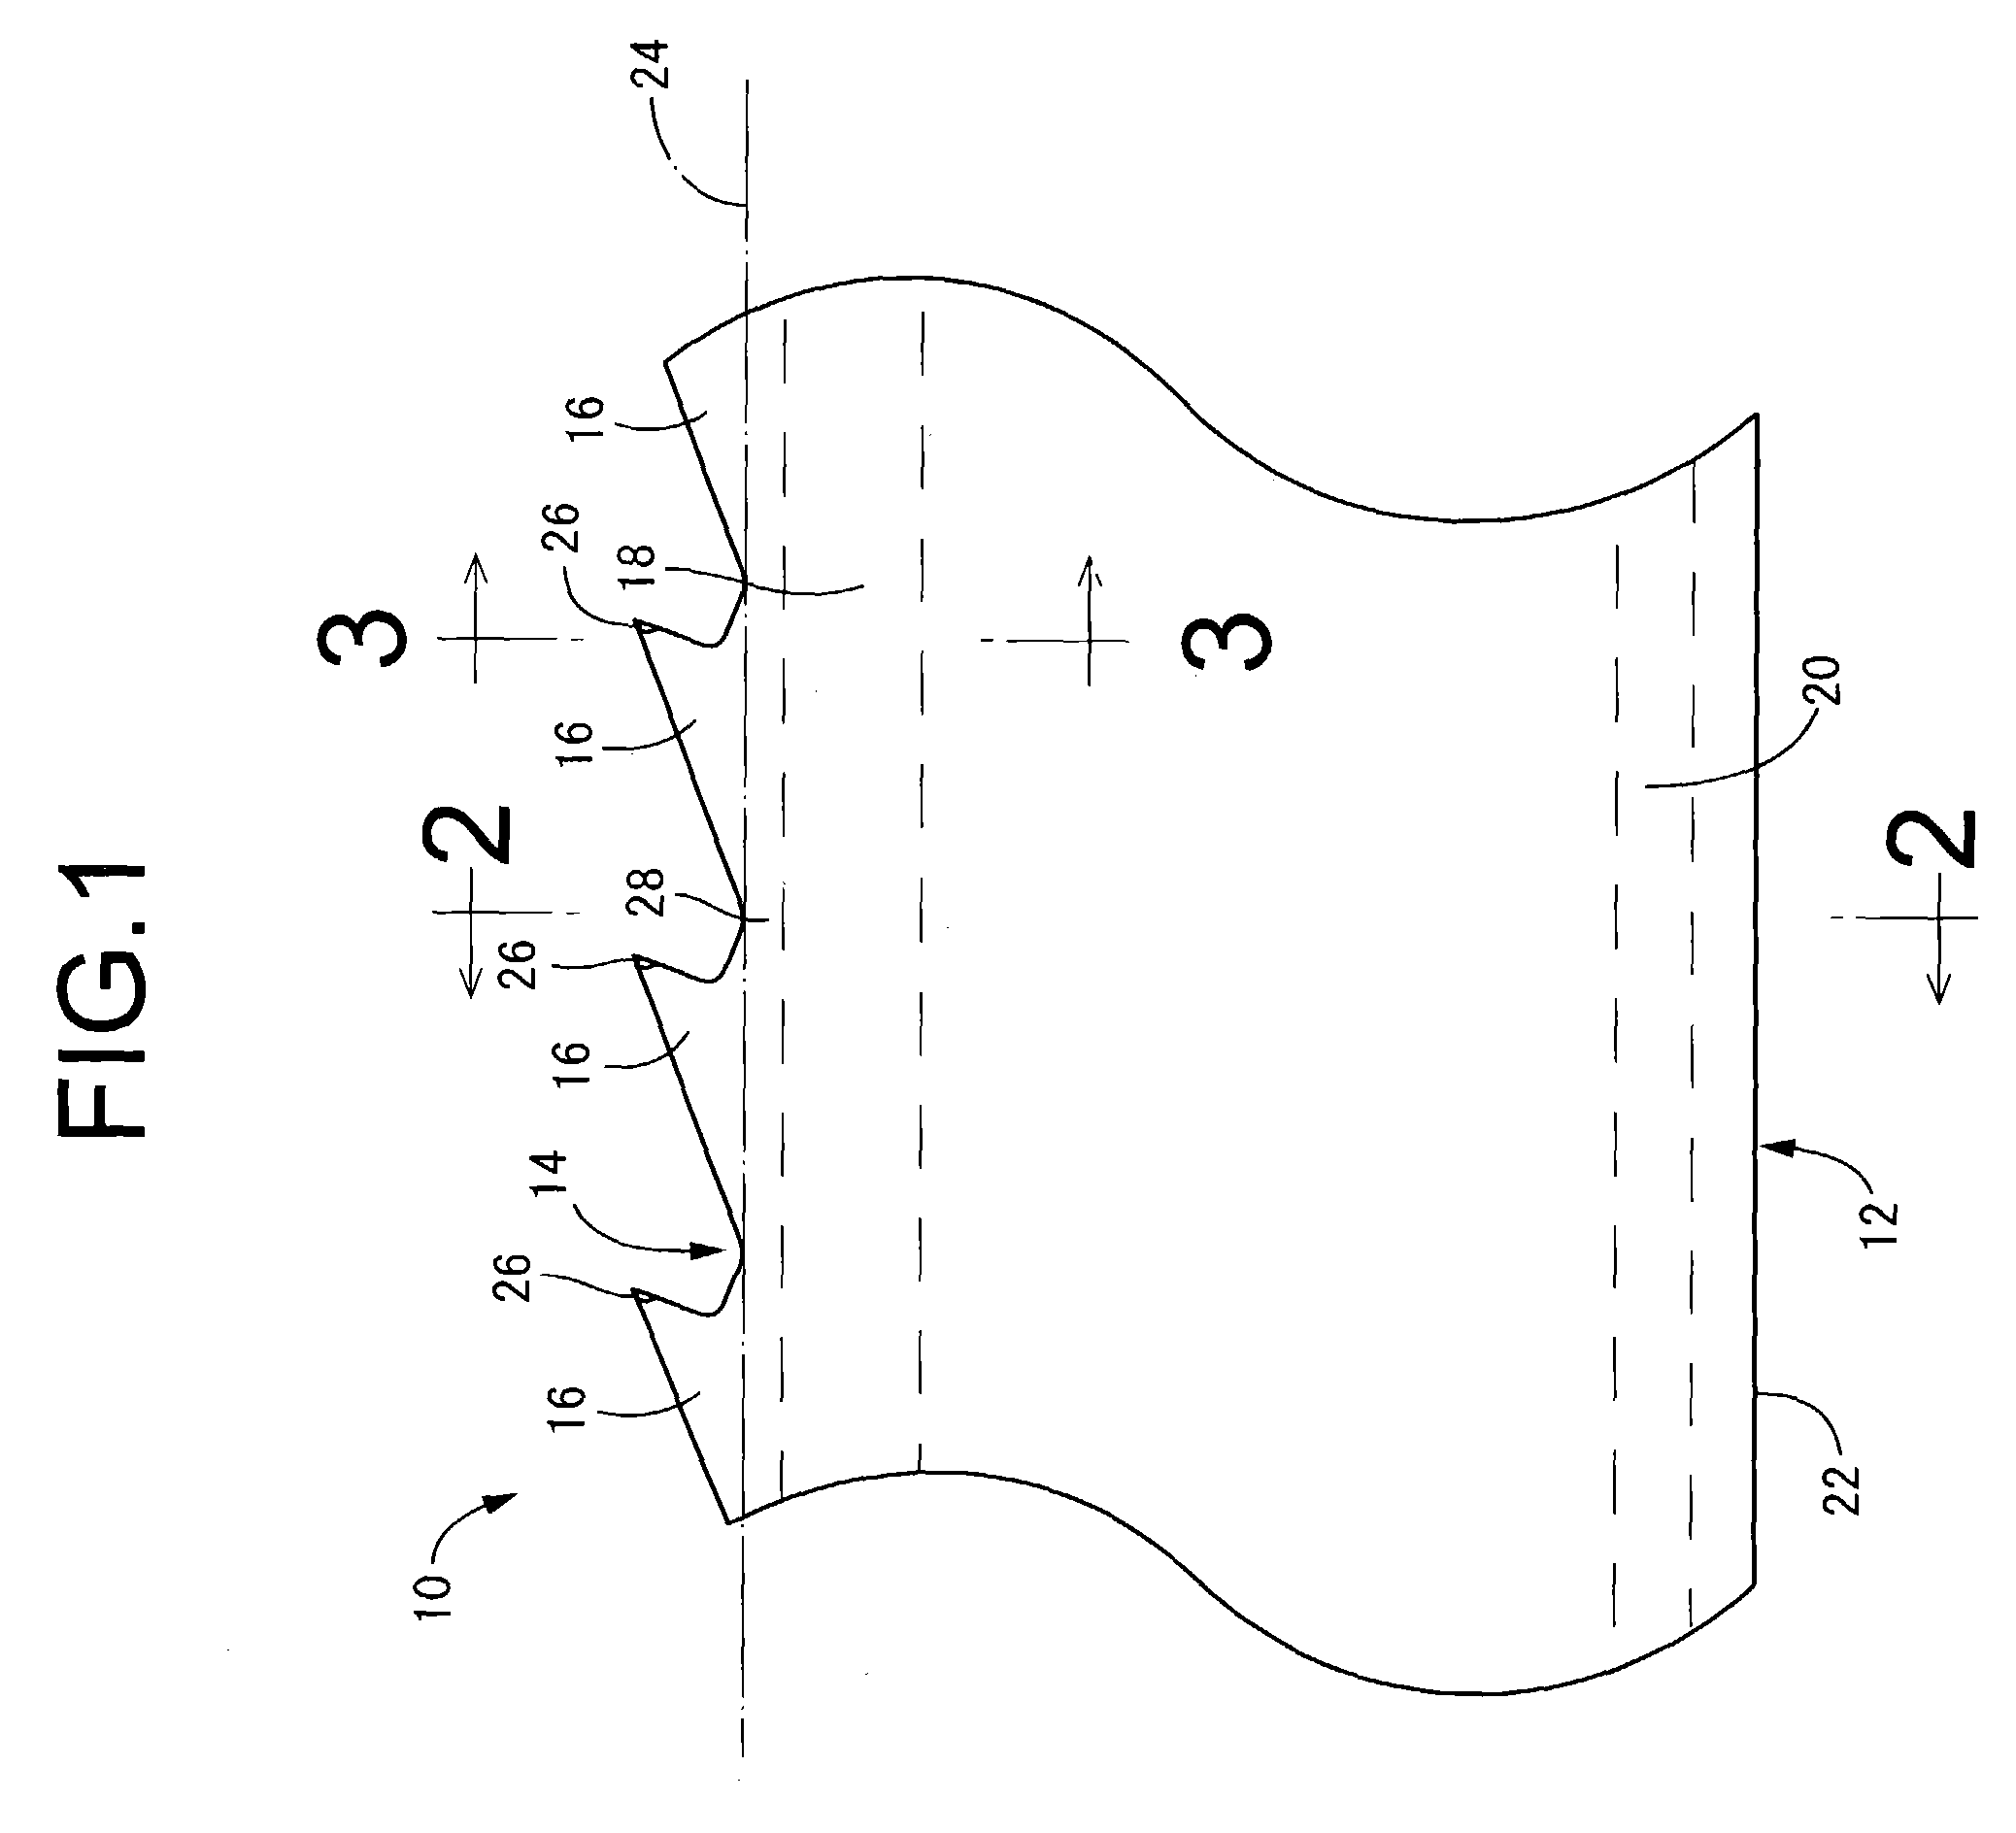 Band saw, band saw processing apparatus and band saw manufacturing method